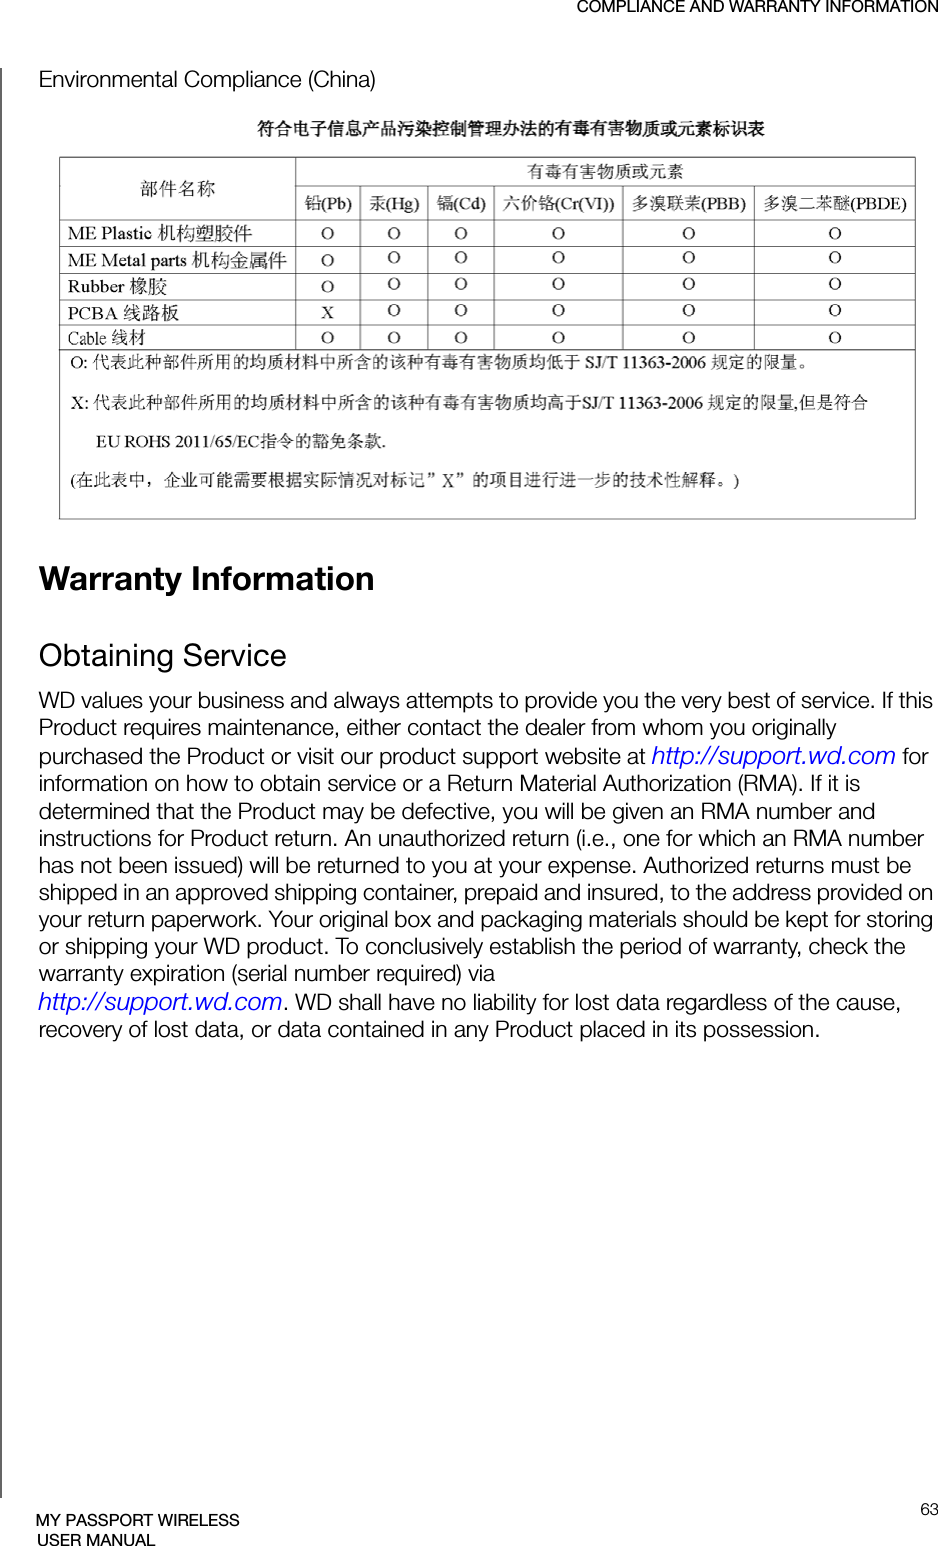 COMPLIANCE AND WARRANTY INFORMATION63MY PASSPORT WIRELESSUSER MANUALEnvironmental Compliance (China)Warranty InformationObtaining ServiceWD values your business and always attempts to provide you the very best of service. If this Product requires maintenance, either contact the dealer from whom you originally purchased the Product or visit our product support website at http://support.wd.com for information on how to obtain service or a Return Material Authorization (RMA). If it is determined that the Product may be defective, you will be given an RMA number and instructions for Product return. An unauthorized return (i.e., one for which an RMA number has not been issued) will be returned to you at your expense. Authorized returns must be shipped in an approved shipping container, prepaid and insured, to the address provided on your return paperwork. Your original box and packaging materials should be kept for storing or shipping your WD product. To conclusively establish the period of warranty, check the warranty expiration (serial number required) via http://support.wd.com. WD shall have no liability for lost data regardless of the cause, recovery of lost data, or data contained in any Product placed in its possession.